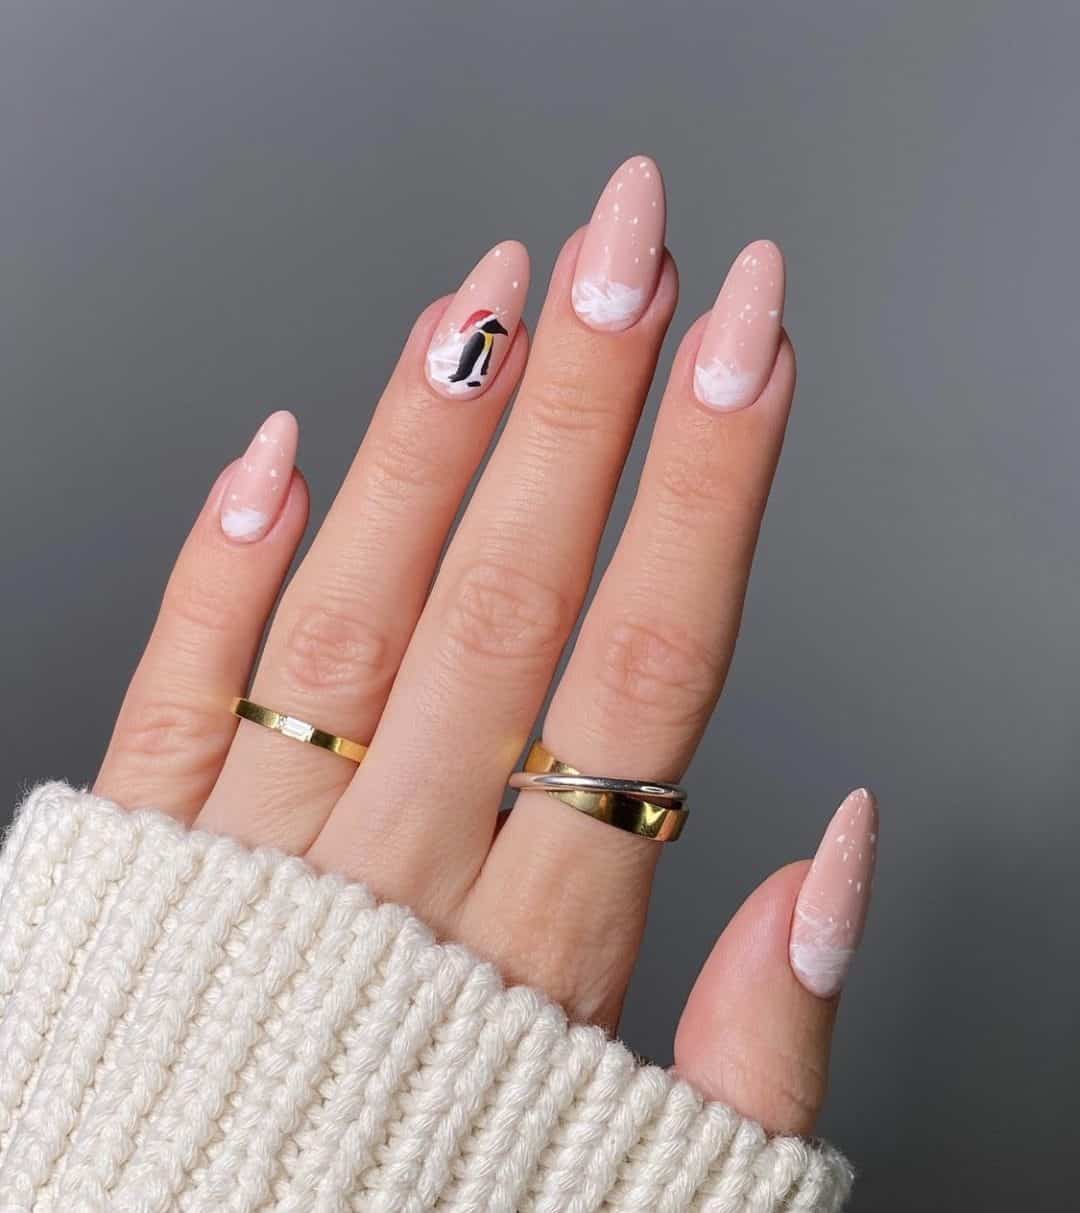 30 Trendy December Nails You’ll Love To Try In 2022. HONESTLYBECCA